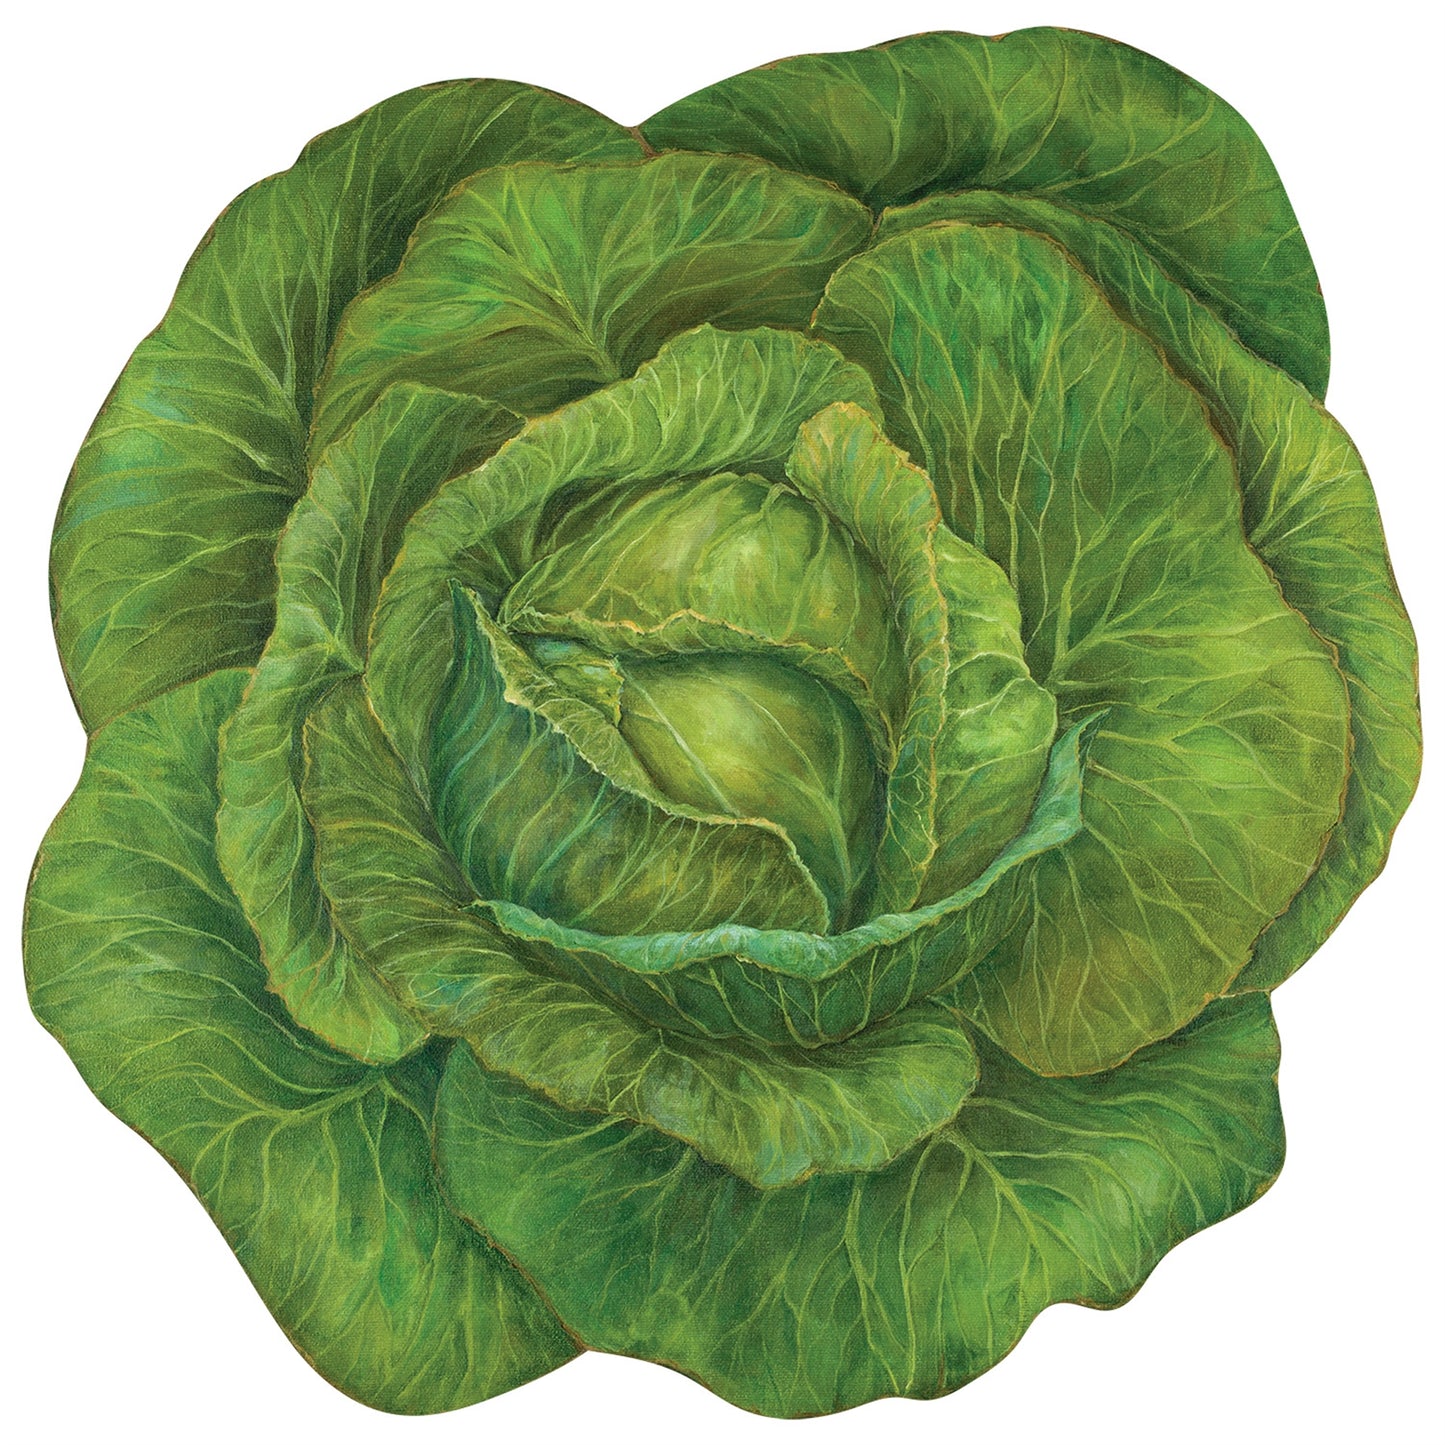 This is a picture of a beautiful bright green cabbage paper placemat that is disposable.